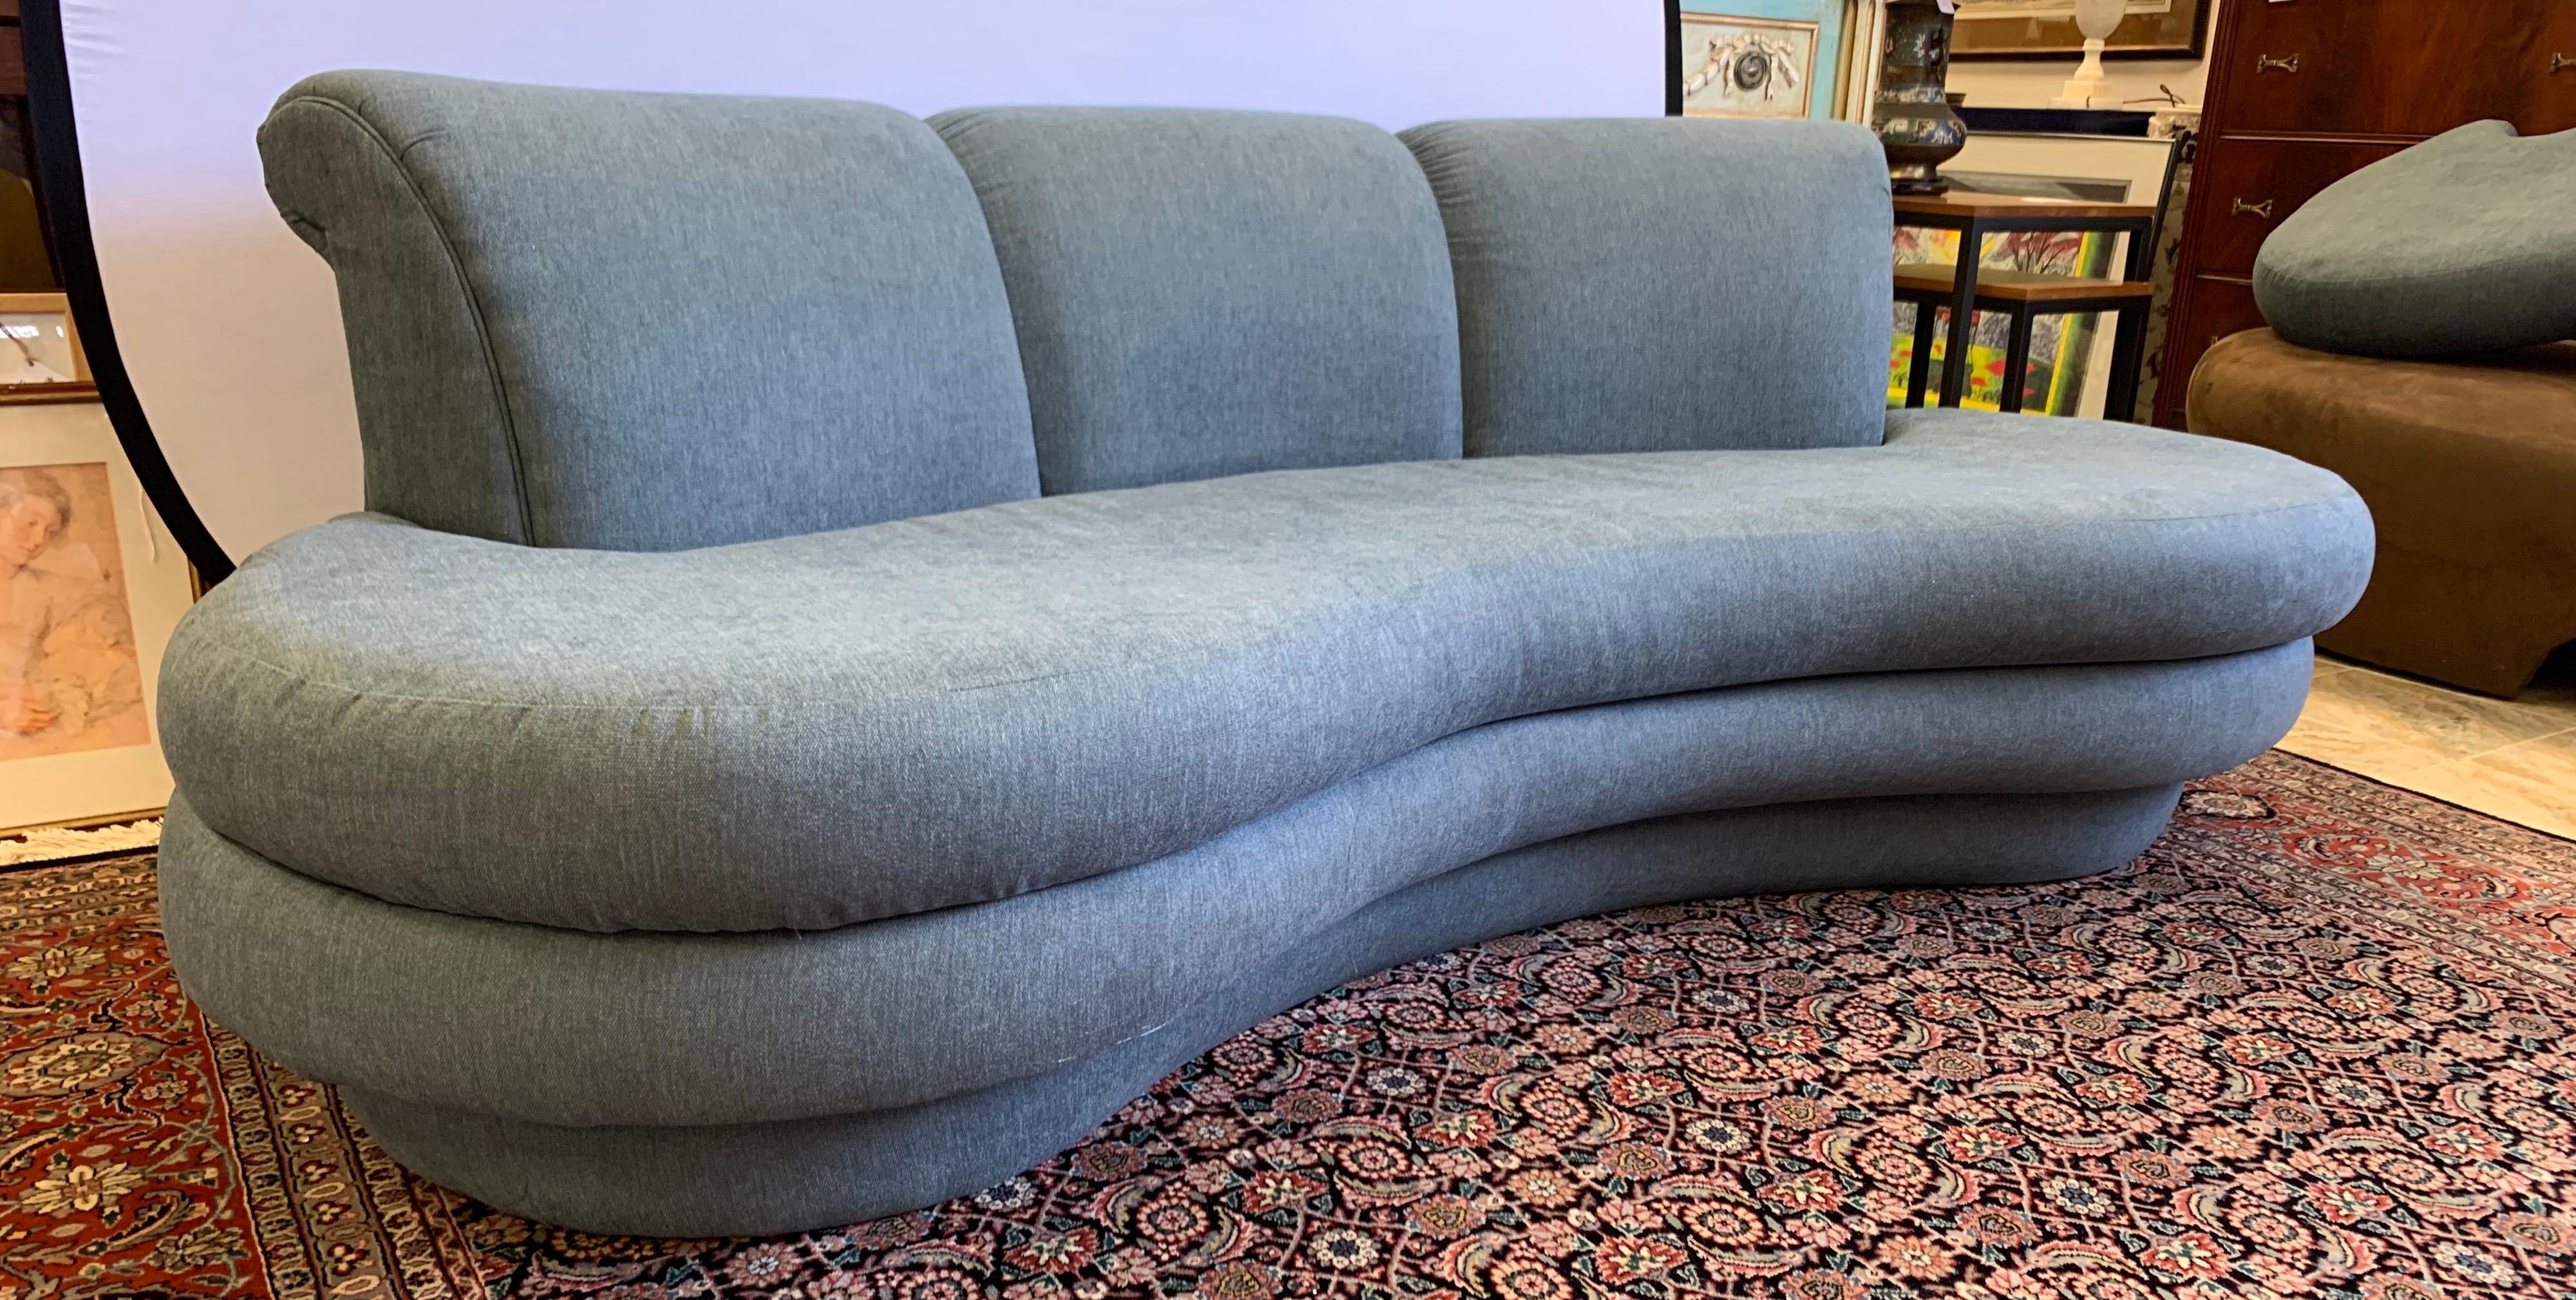 Newly upholstered this week in a luxurious slate gray cotton blend fabric, this Pearsall seven foot sofa has the lines, scale and comfort that make it so coveted. It is one of two identical Pearsall sofas that
we are selling exclusively on 1stDibs